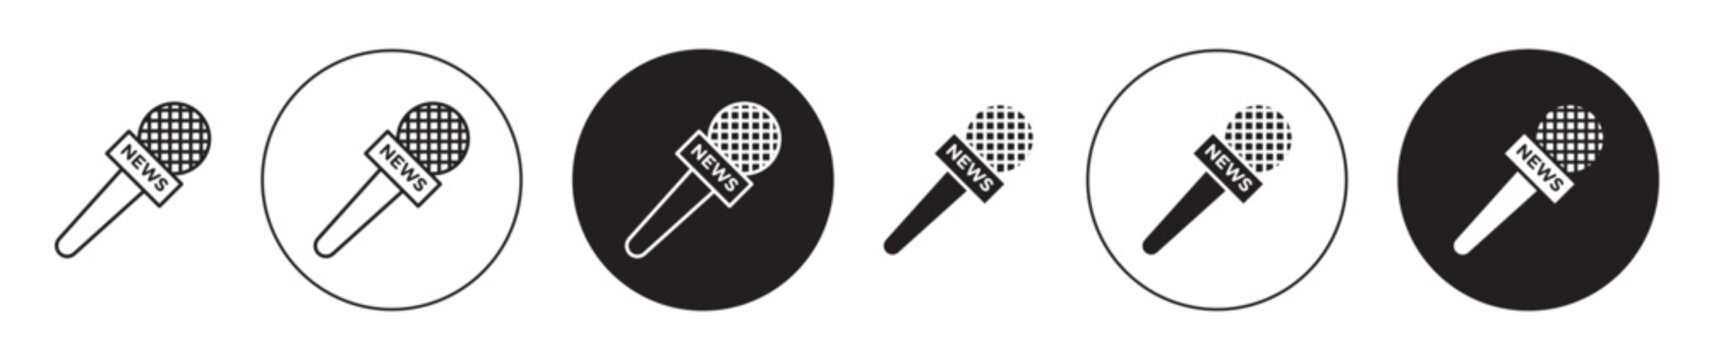 news microphone vector icon set. tv reporter interview mike symbol. journalist mic symbol in bkack color.